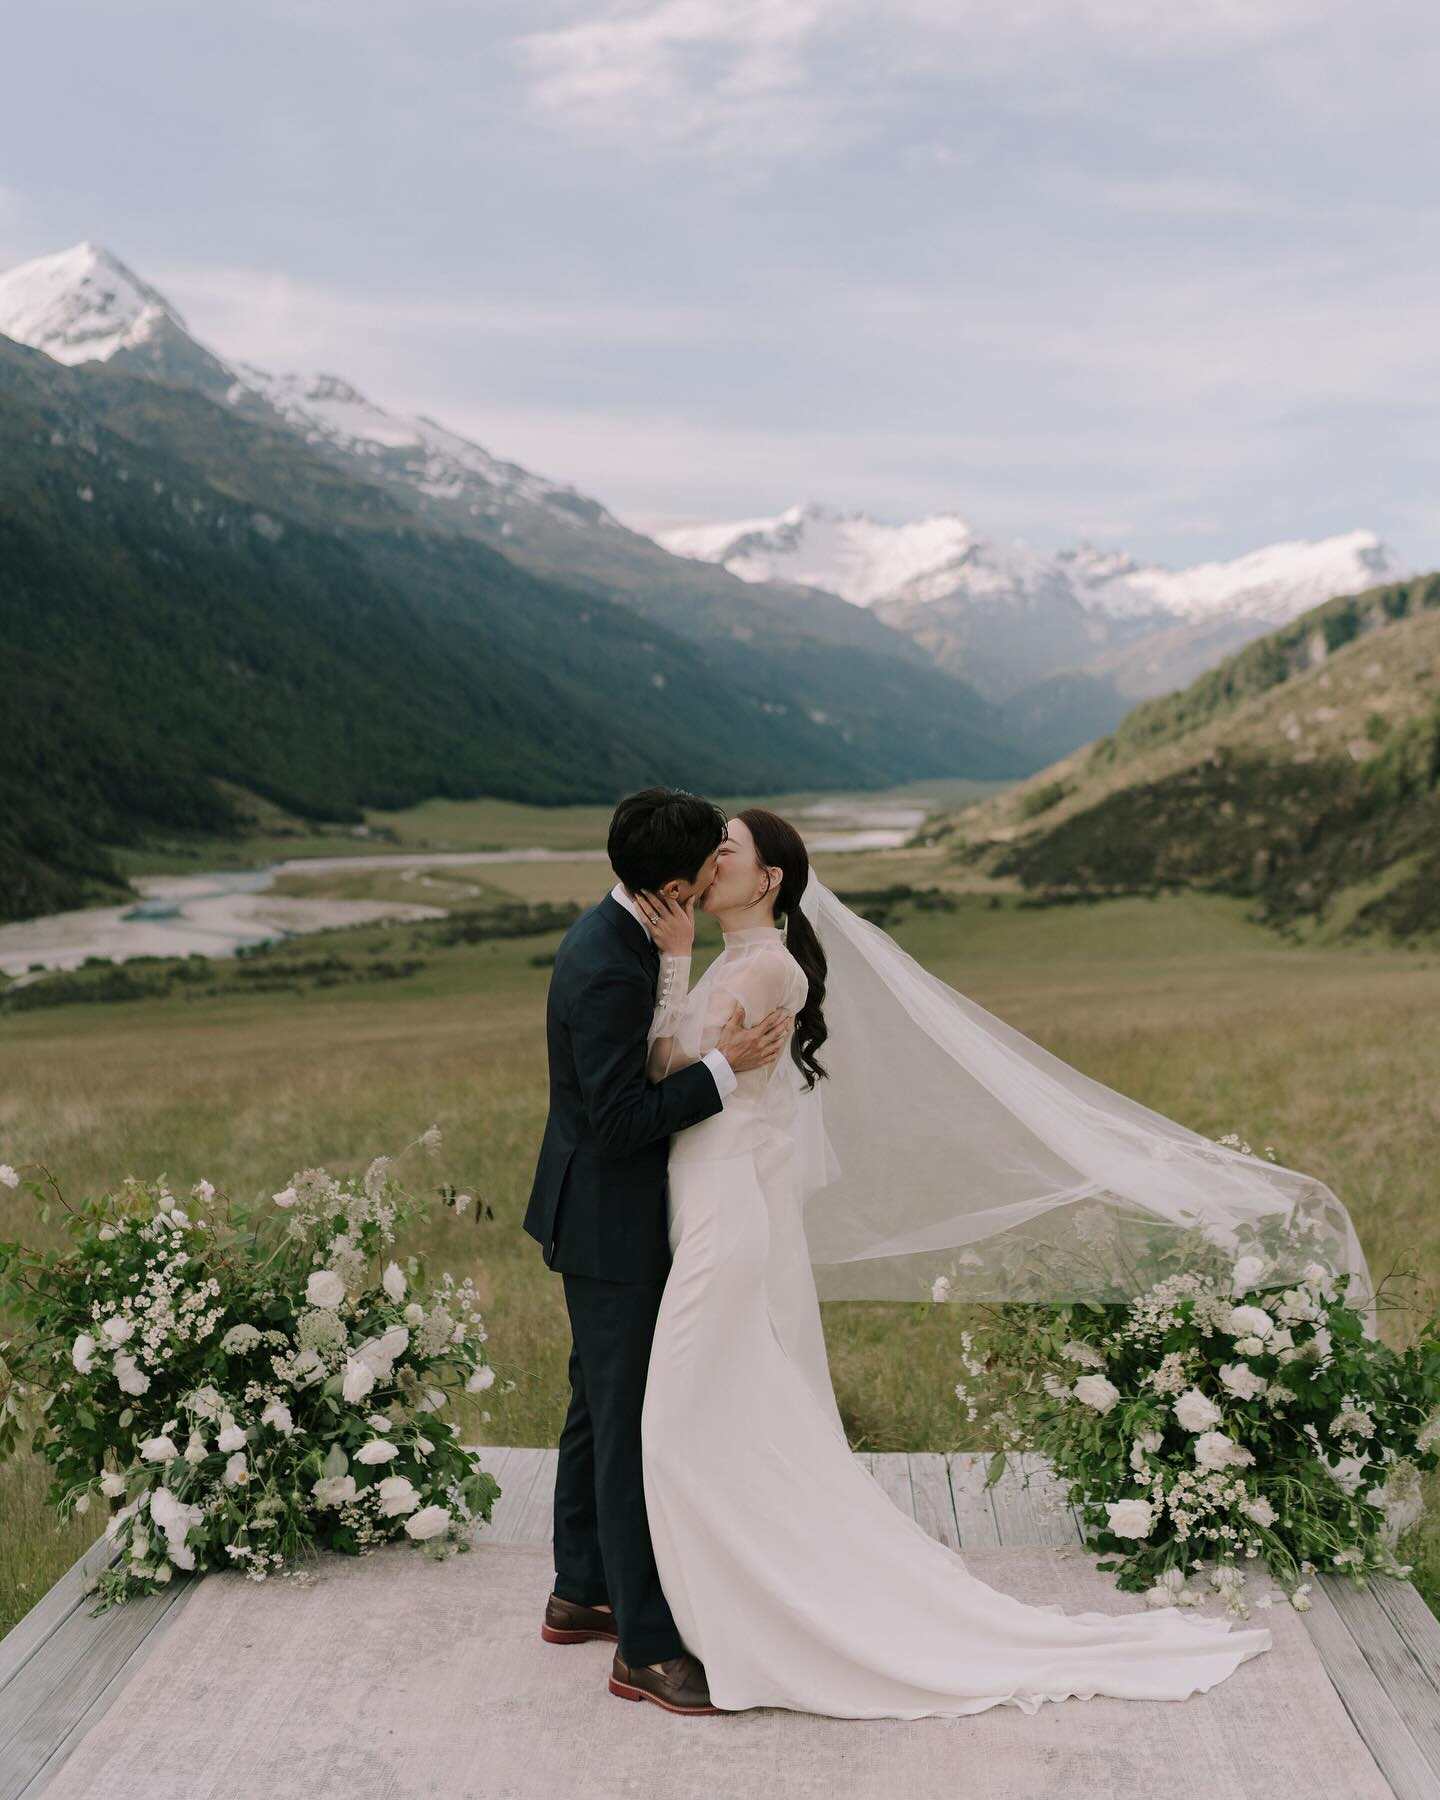 5 Eco-Friendly Gems For Your Dream Wedding in New Zealand